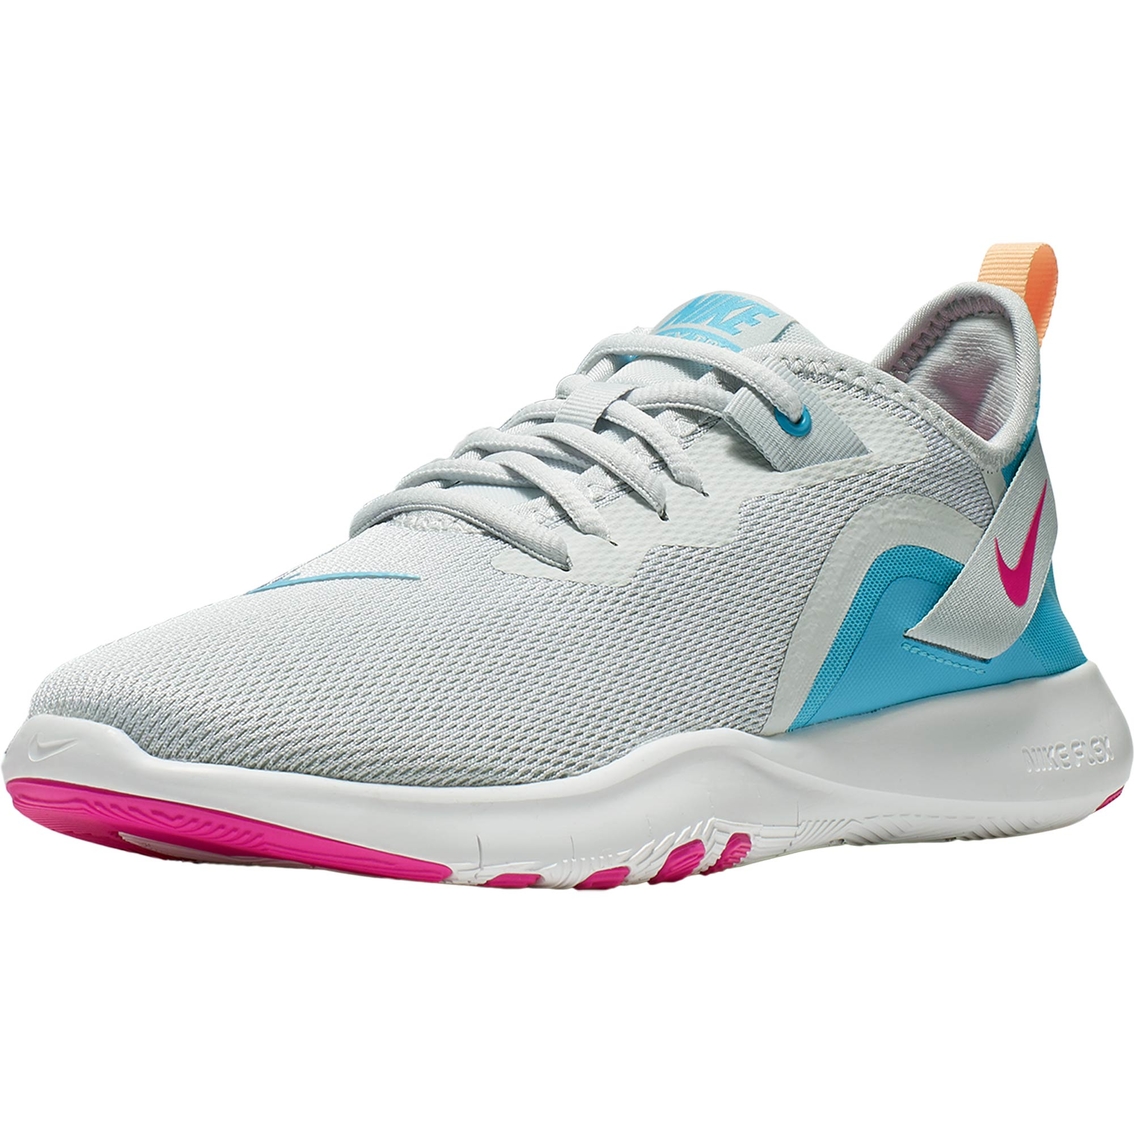 nike women's white and pink trainers